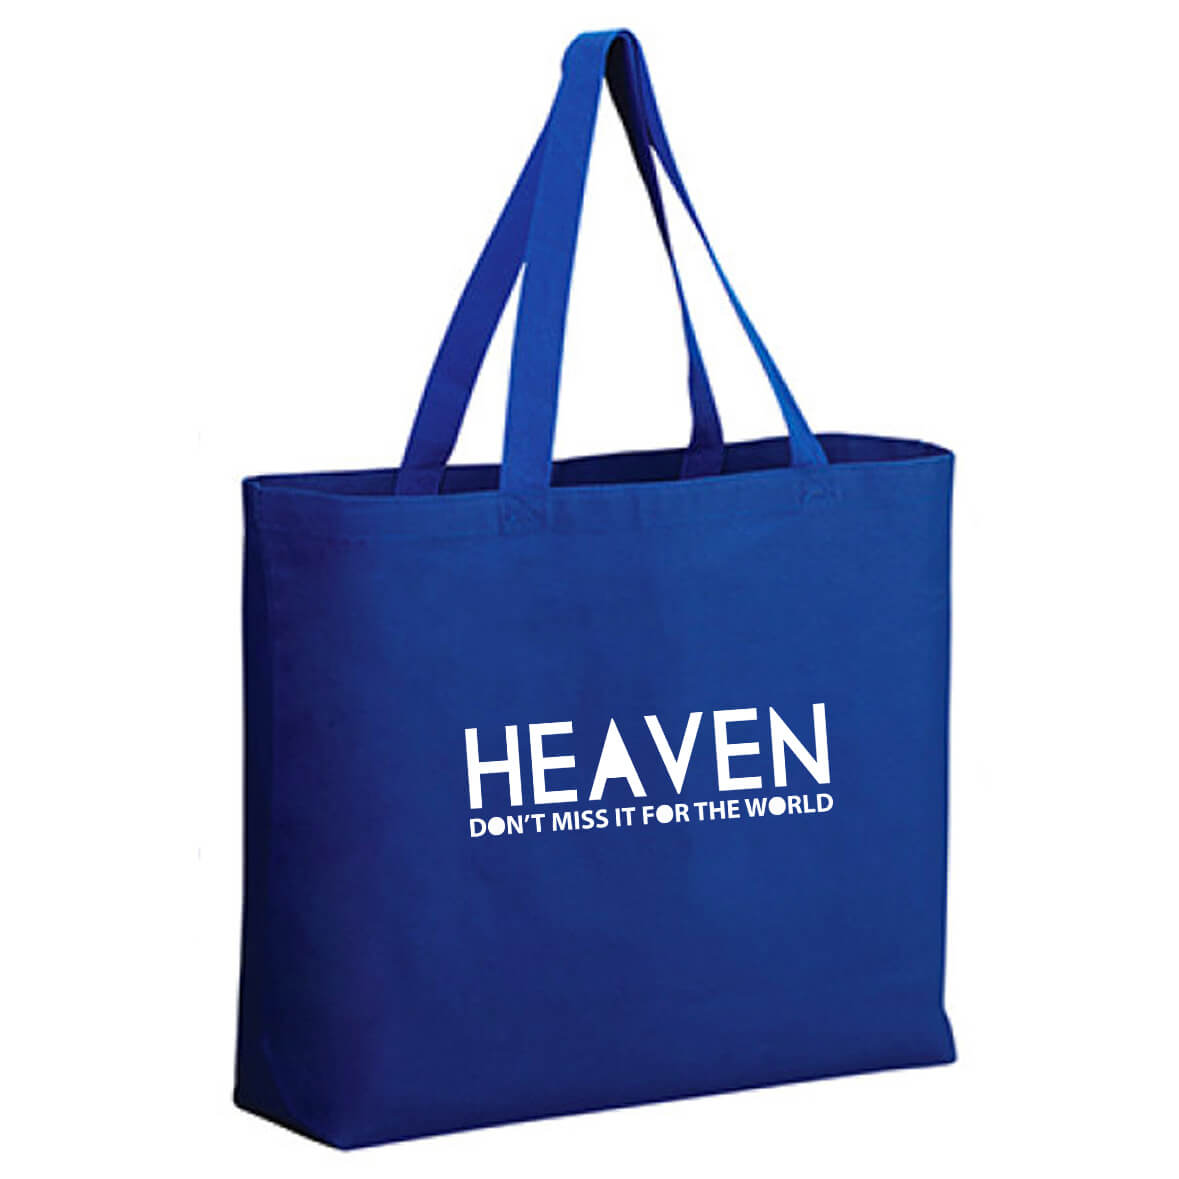 Heaven Don't Miss It For The World Jumbo Tote Canvas Bag